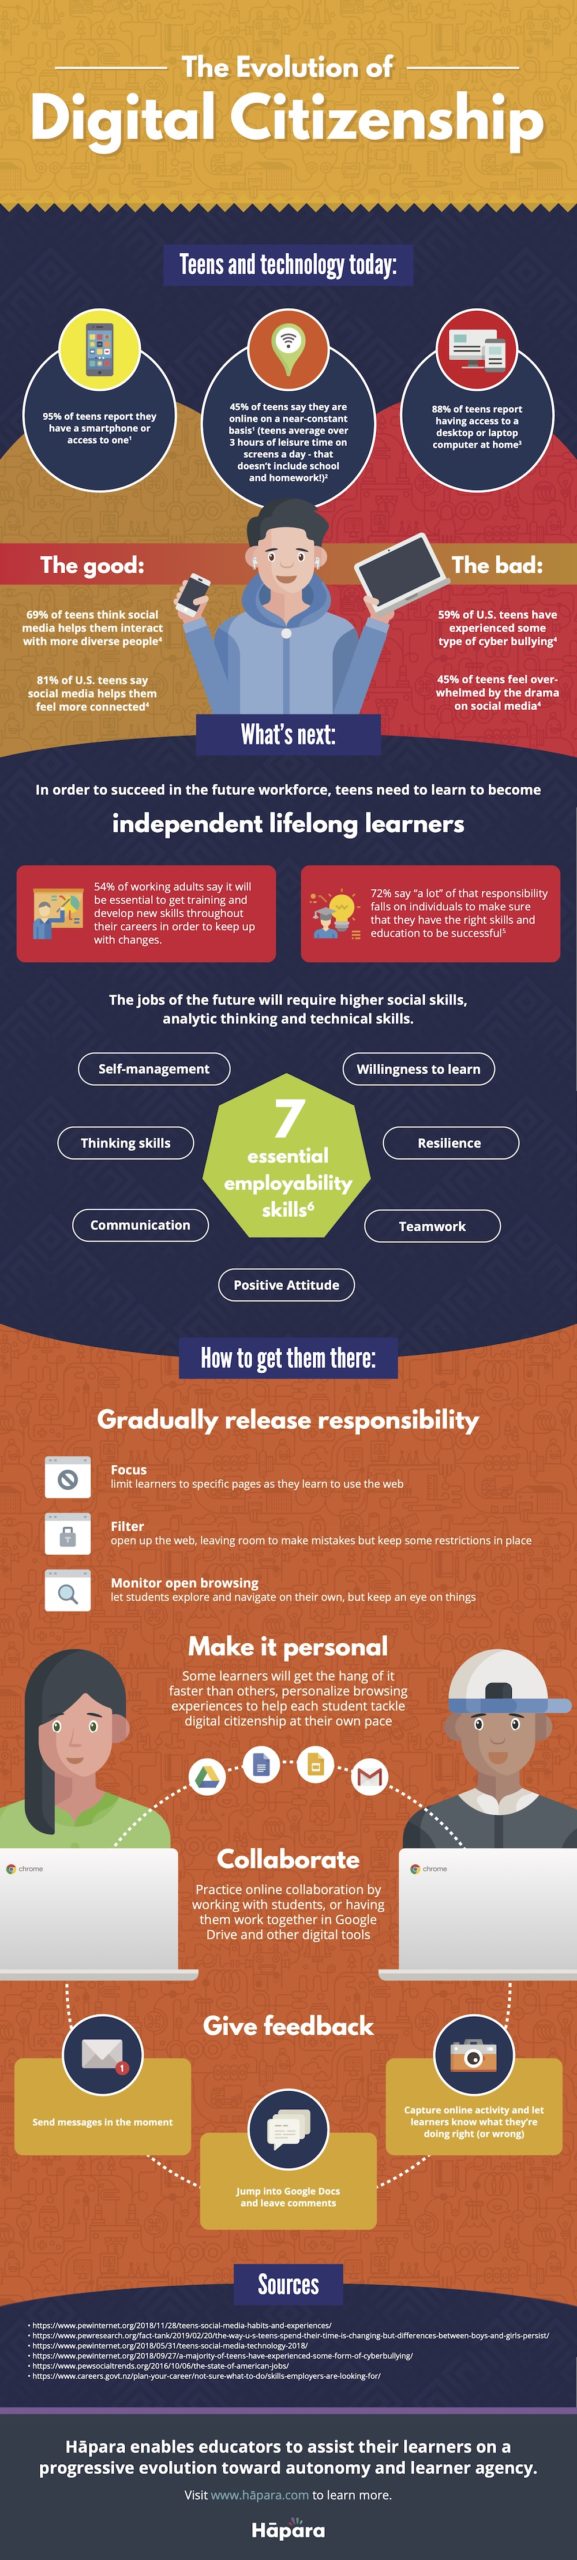 The Evolution of Digital Citizenship Infographic